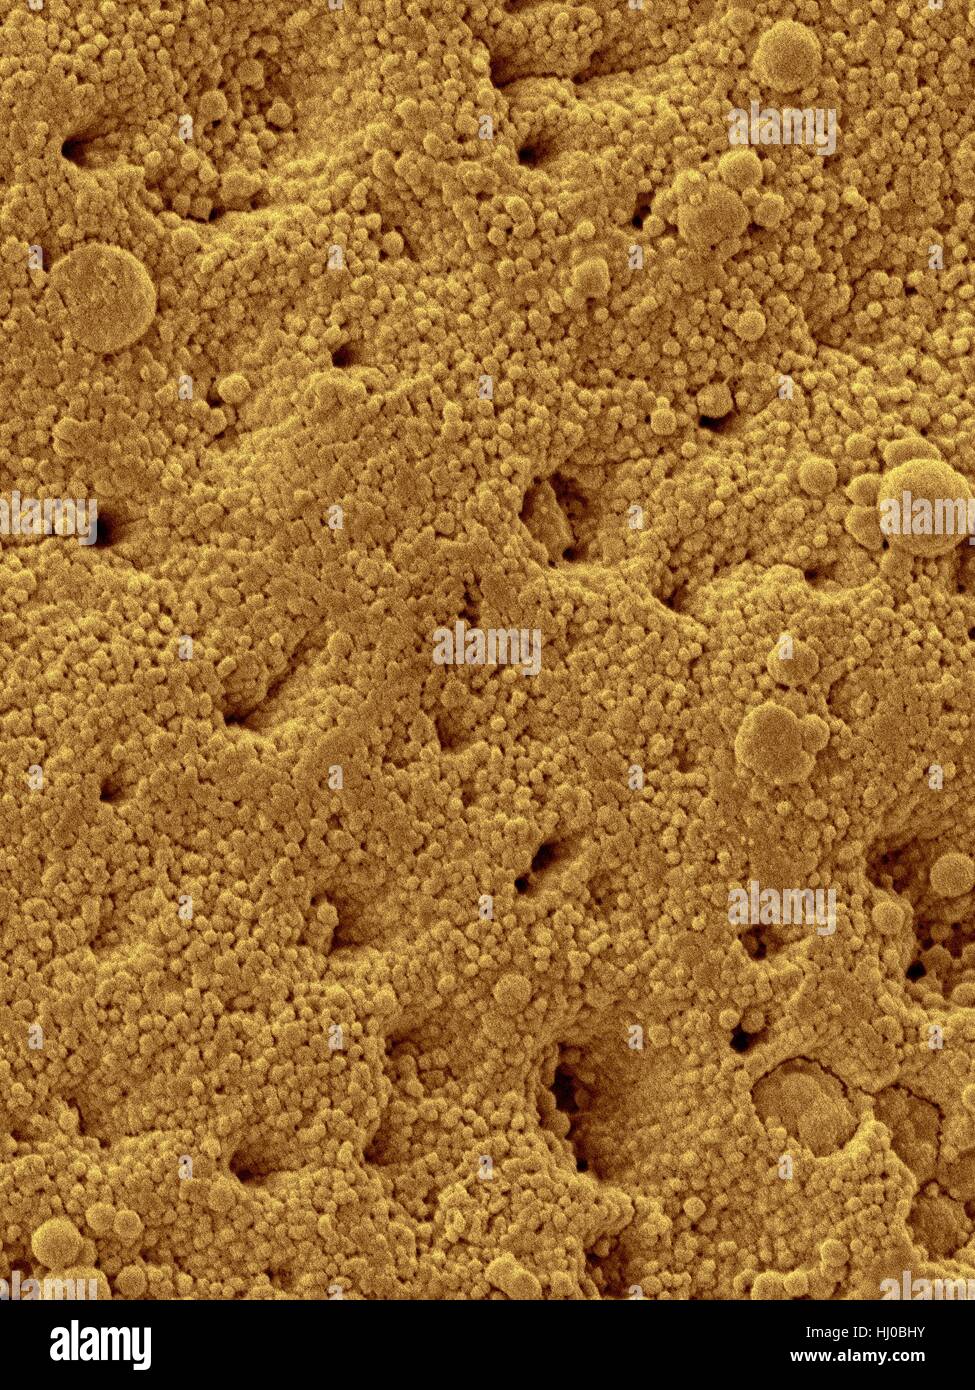 Coloured scanning electron micrograph (SEM) Chicken eggshell surface (Gallus gallus domesticus).Shown here are surface mineral crystals that form many tiny pores in bird eggshell.Eggshells are outer covering of hard-shelled eggs of other eggs soft outer coats.Eggshell structure varies widely among Stock Photo